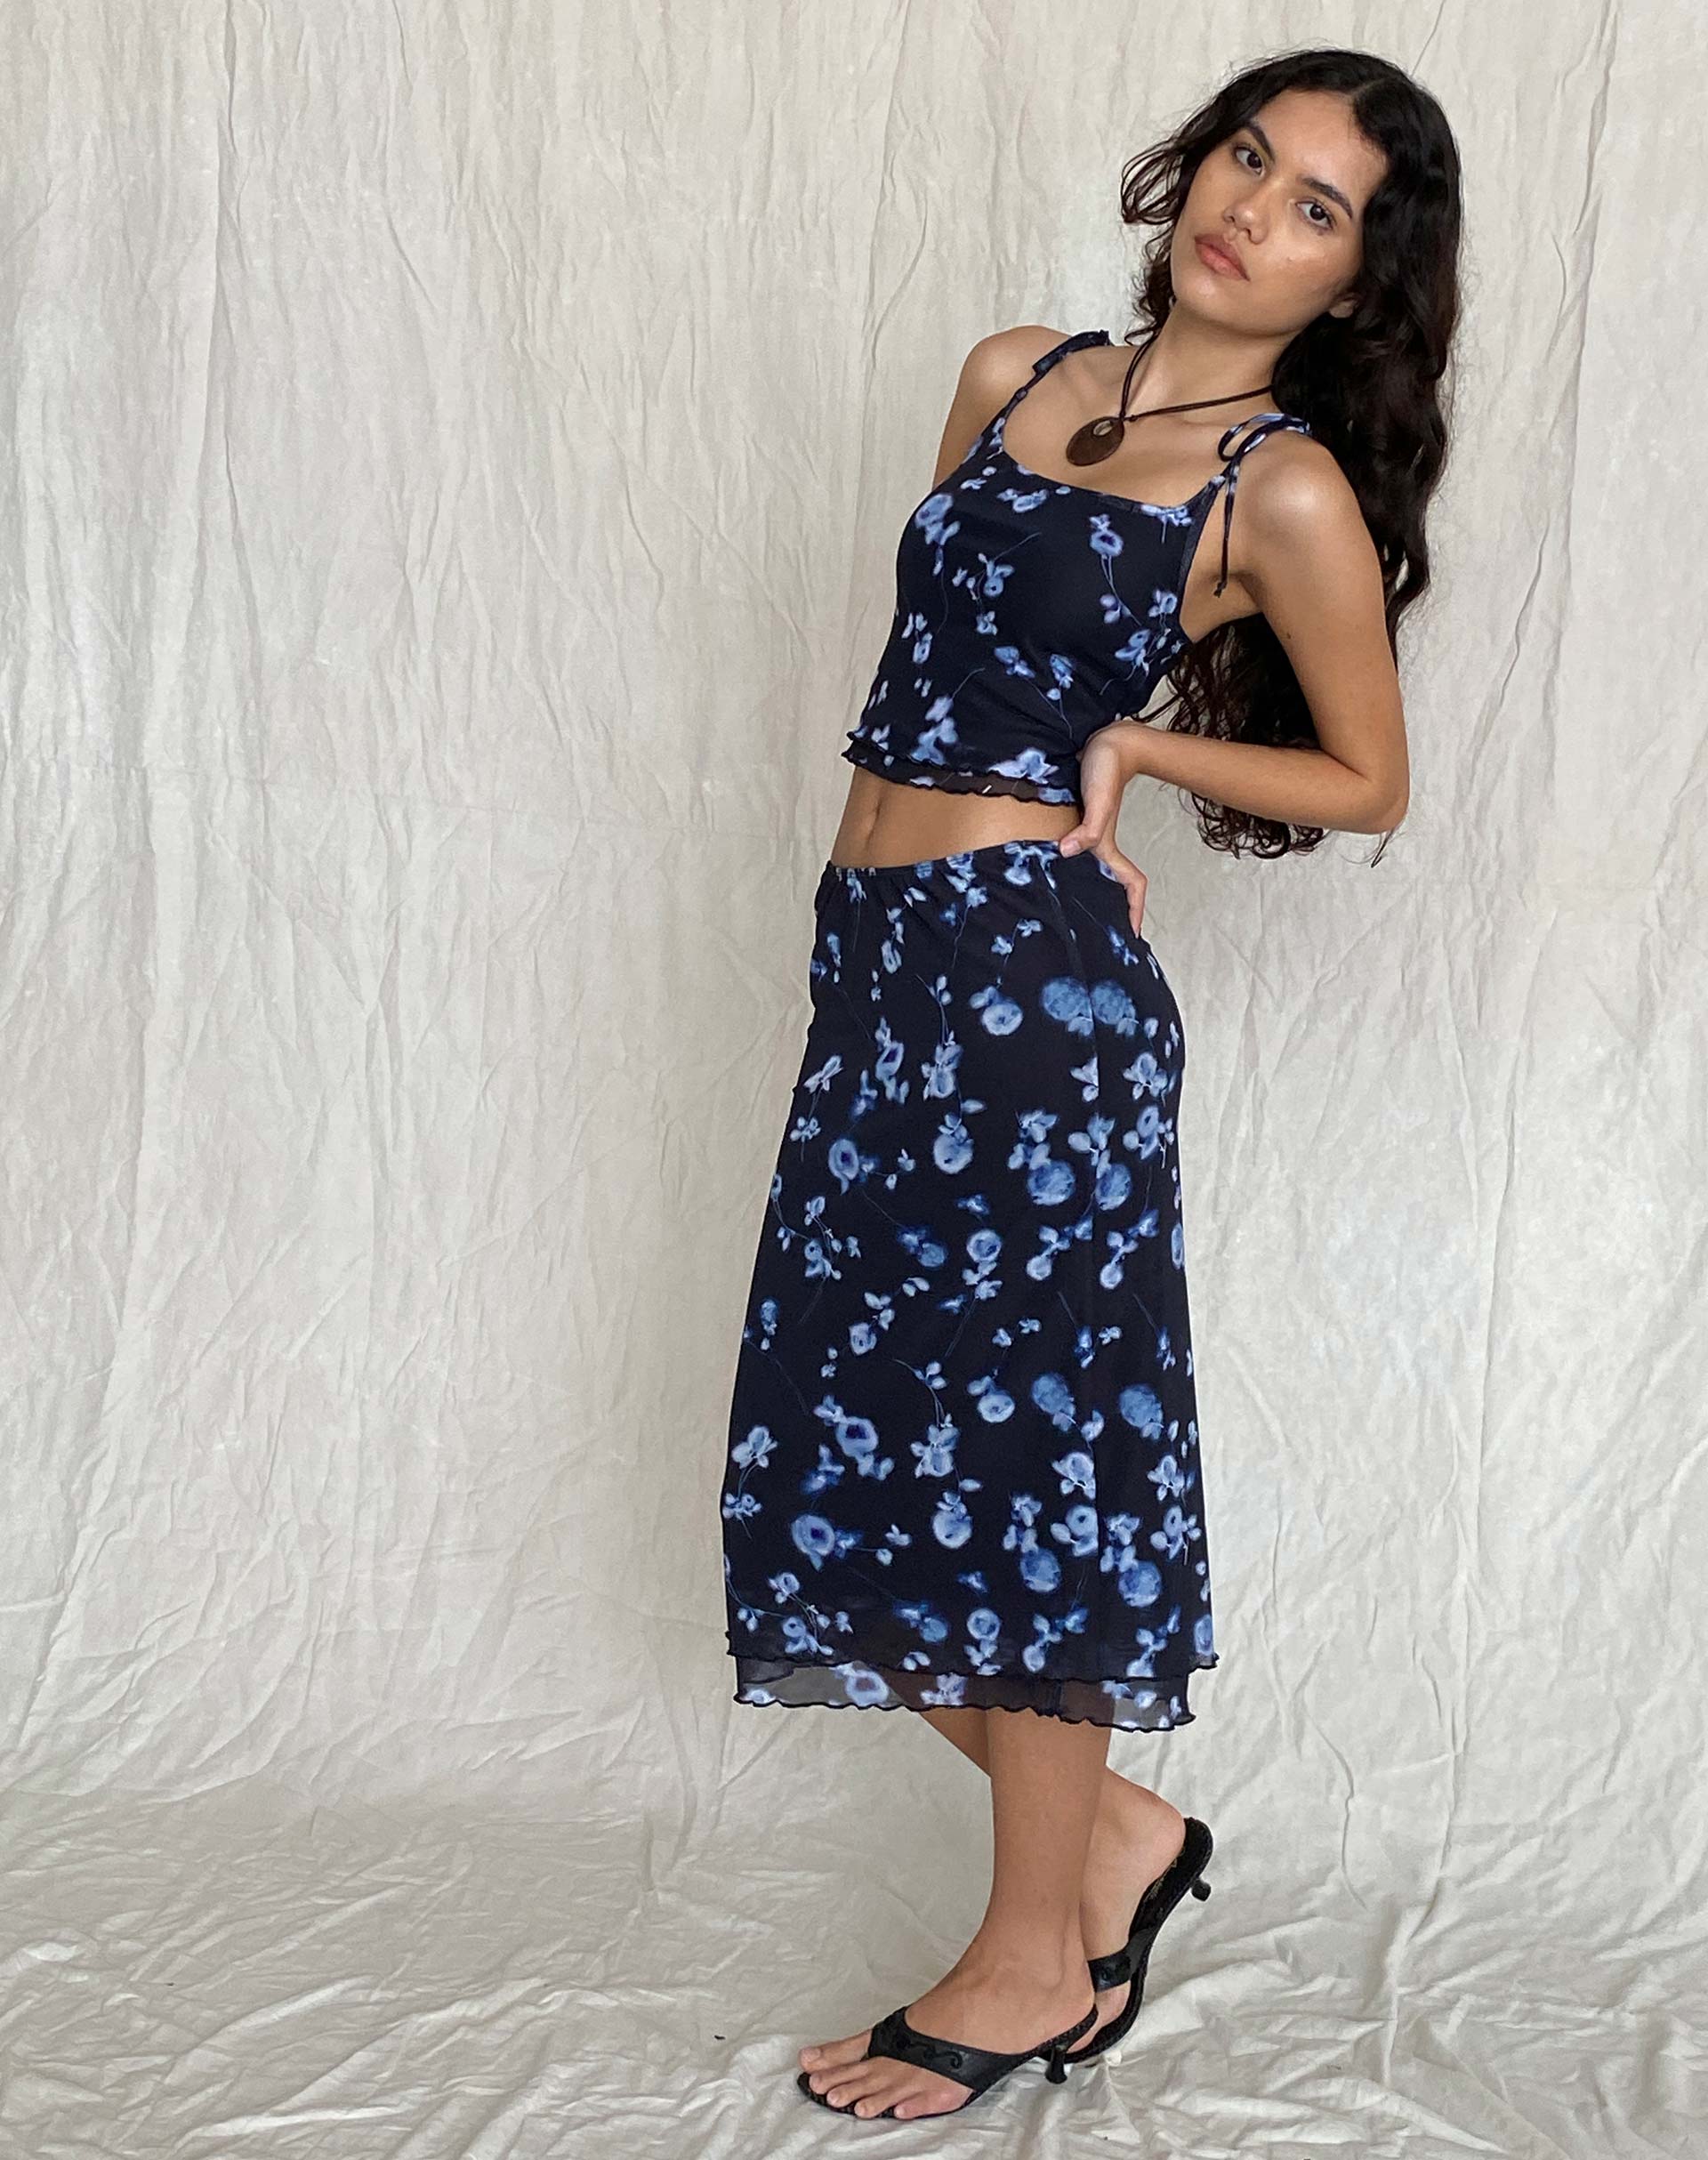 Image of Eldonia Mid Skirt in Mesh Navy Diffused Floral